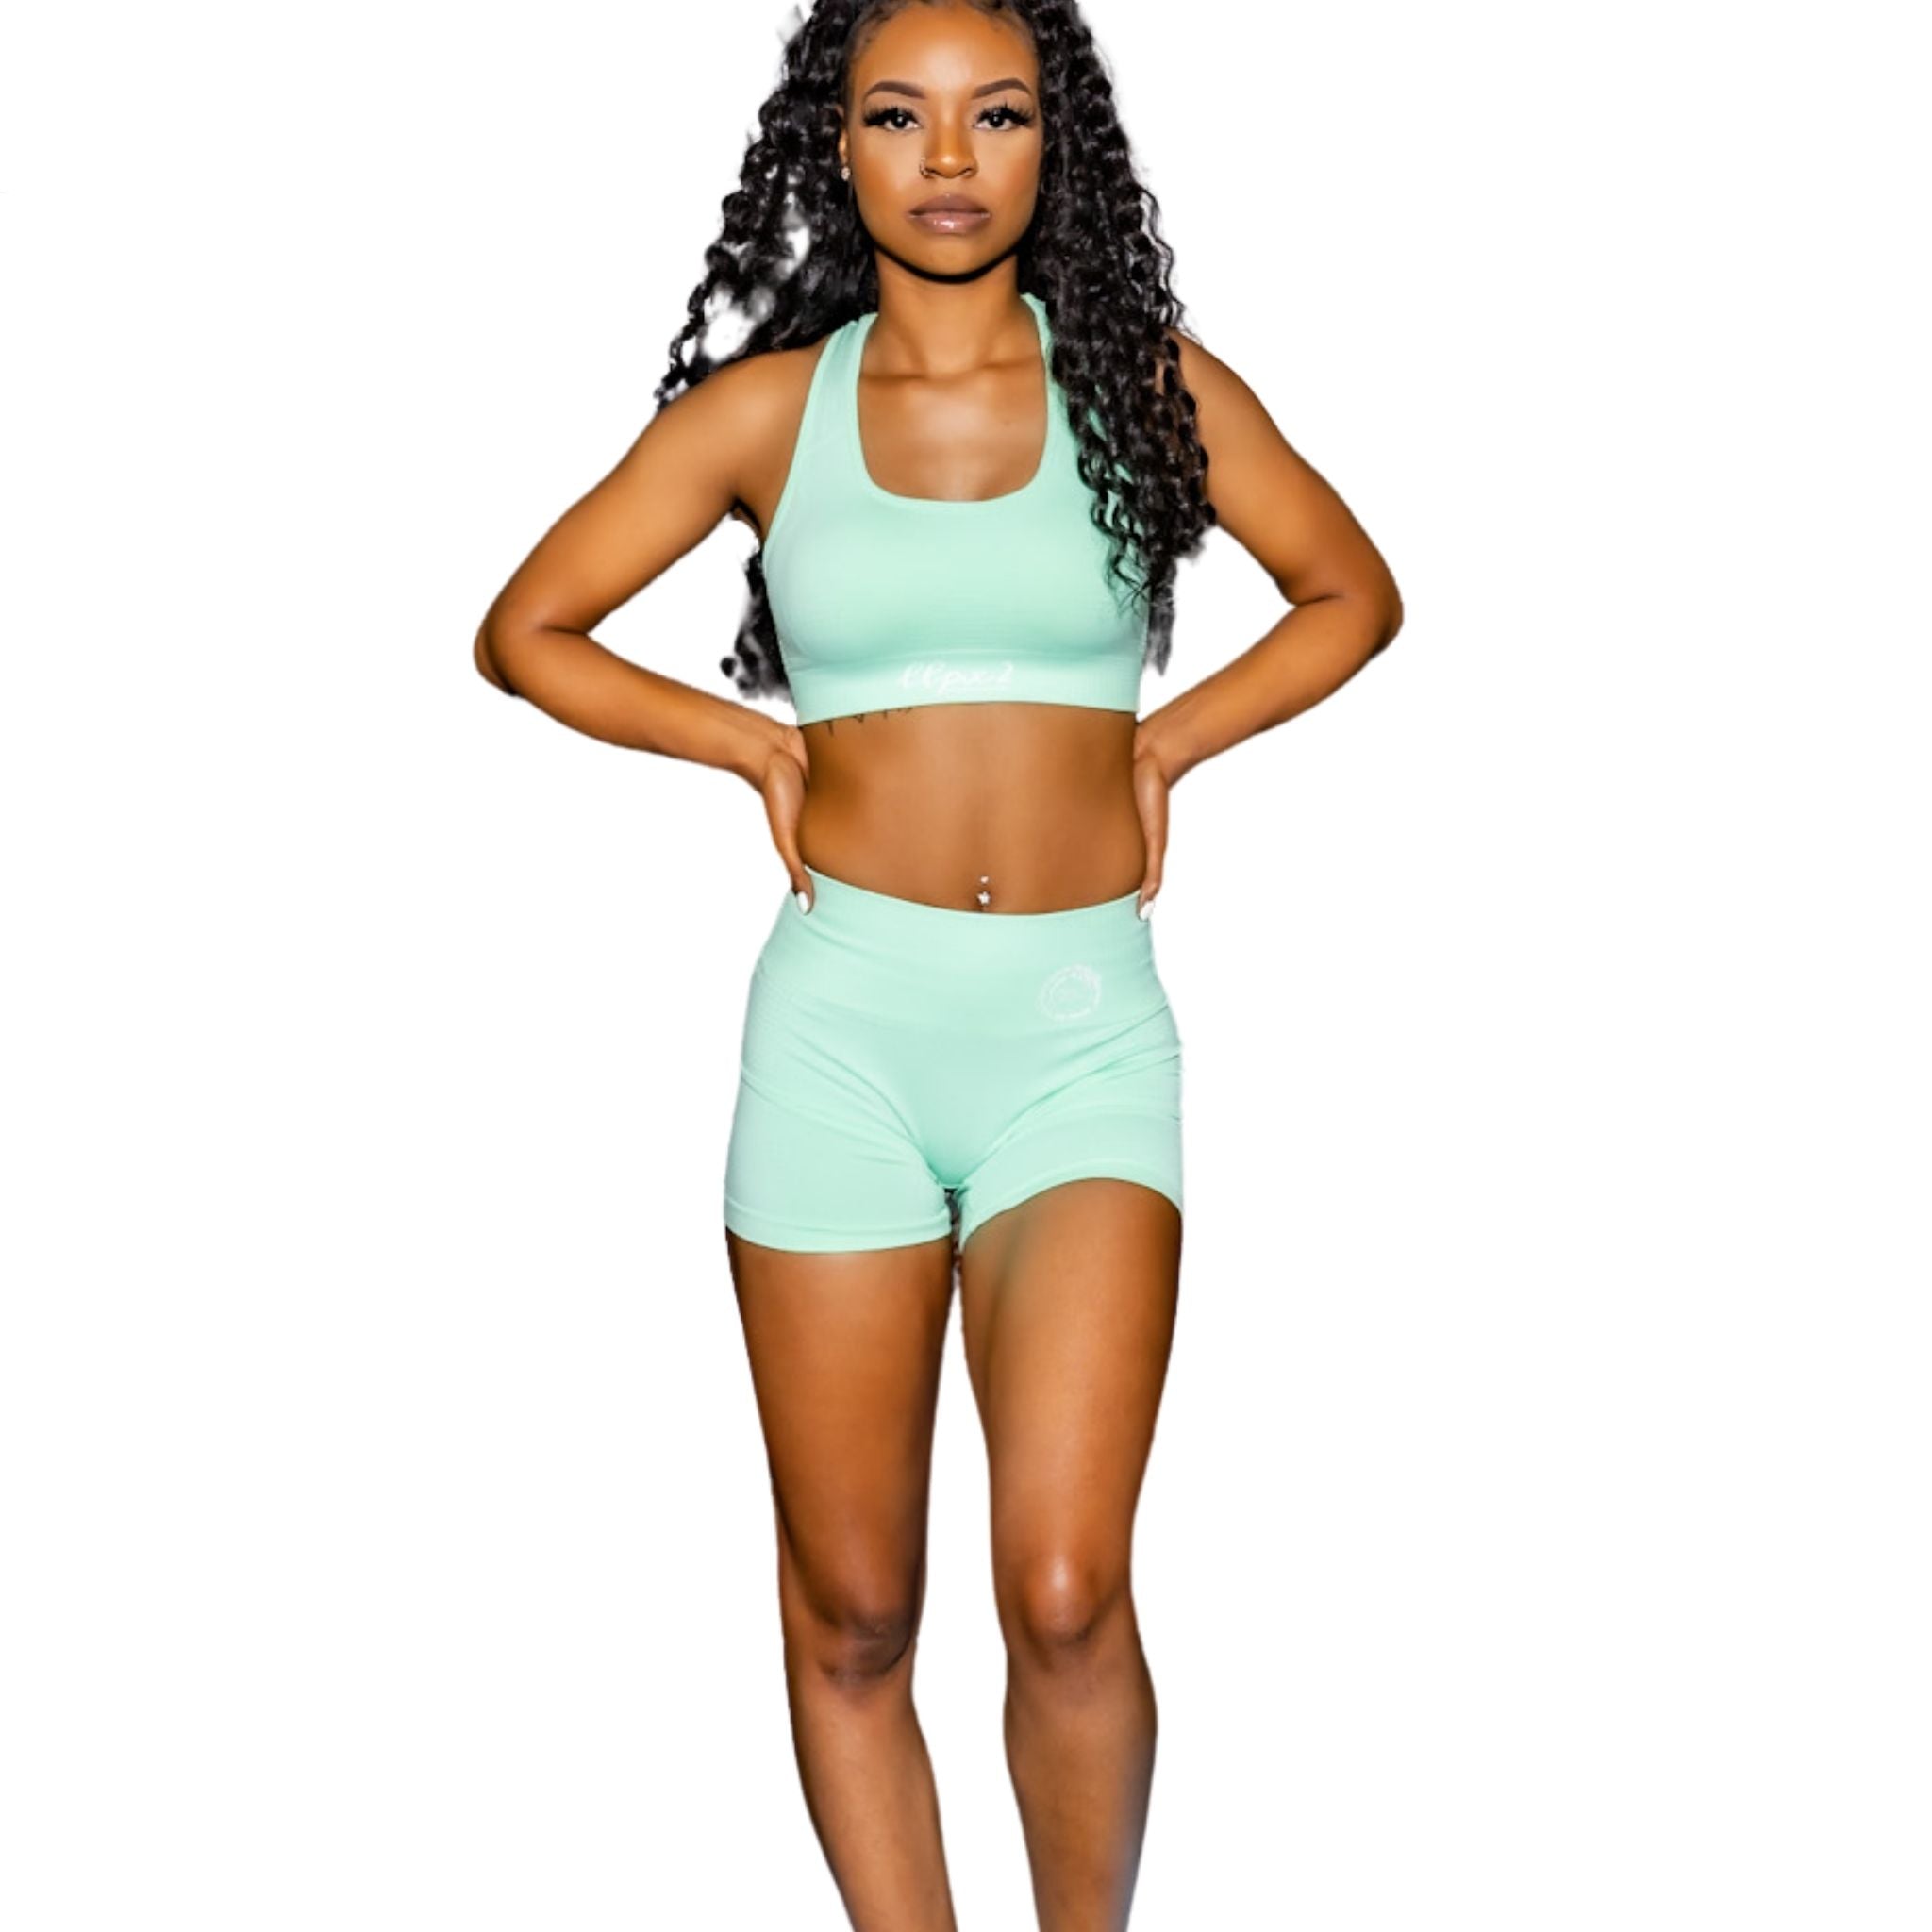 Workout Outfits 5 Piece Set for Women High Elasticity Yoga